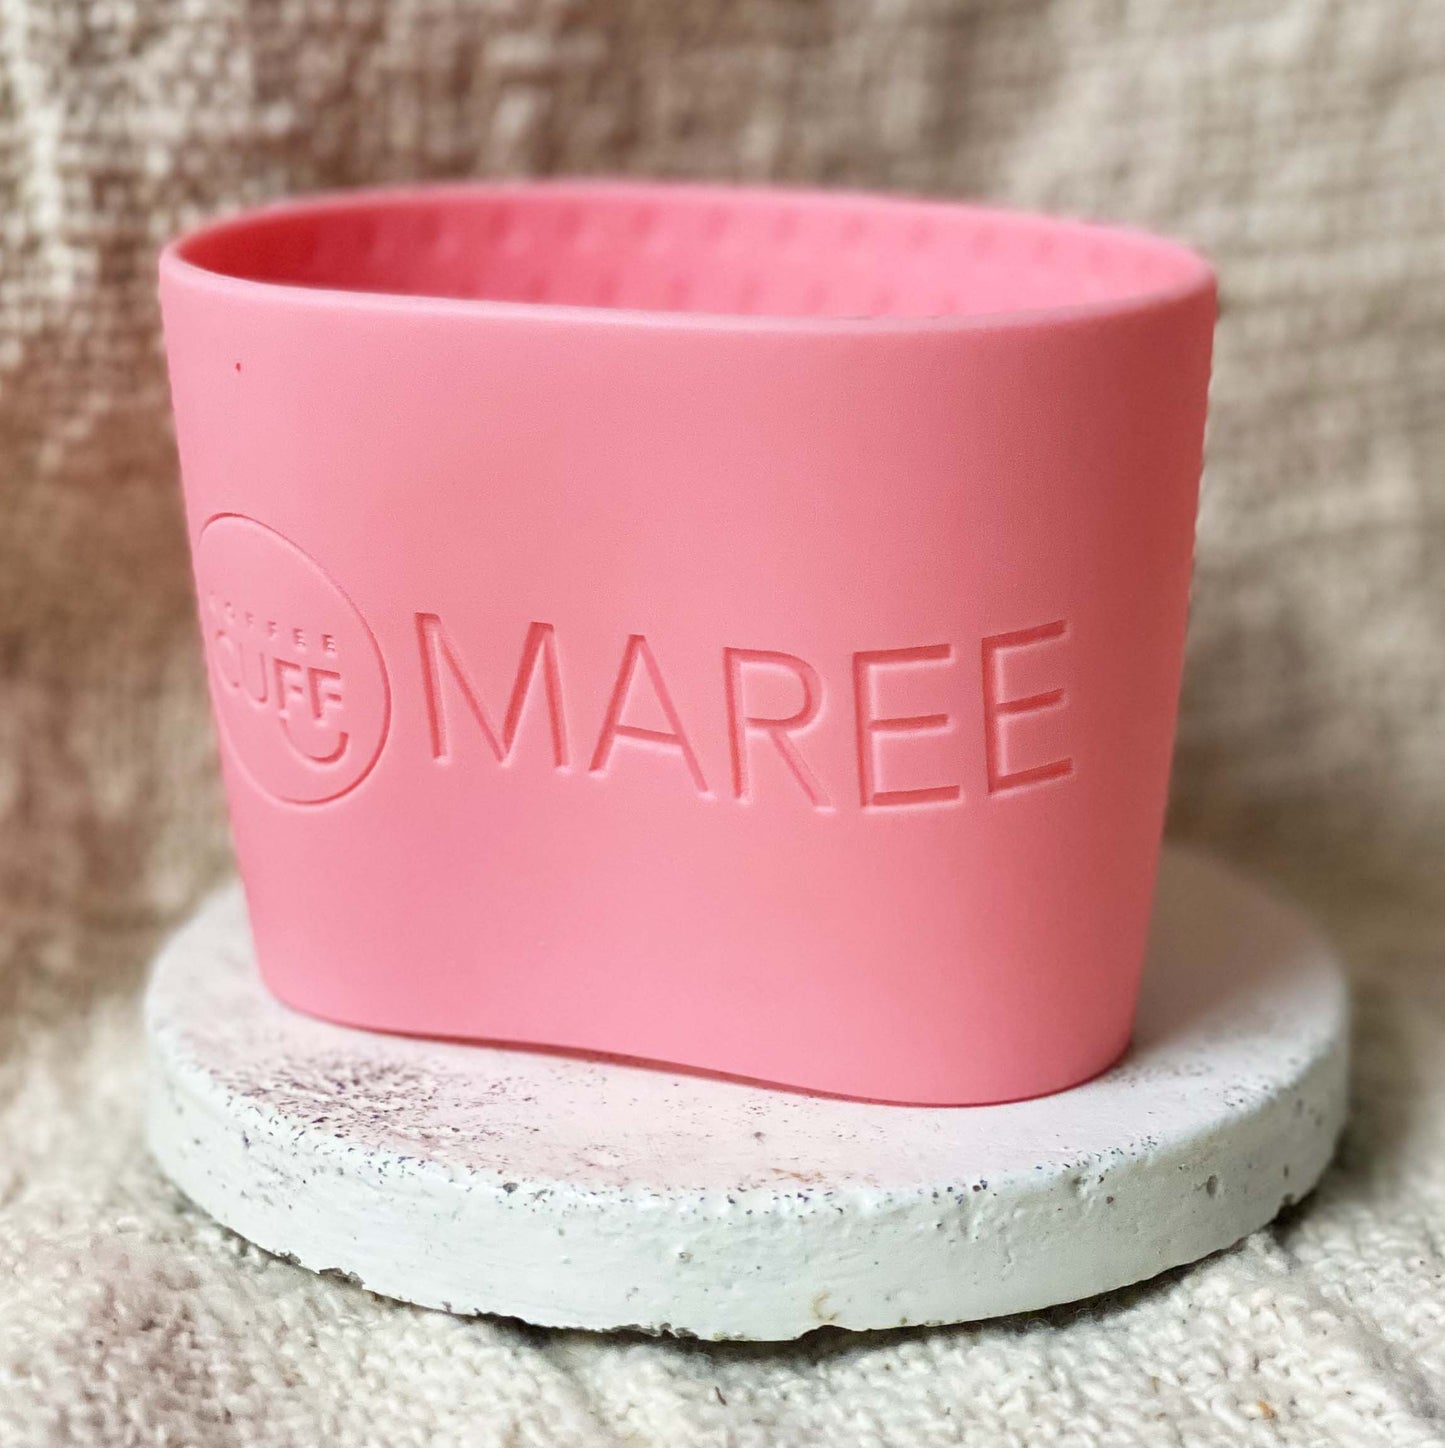 Bamboo Cup in pink with coffee drink order